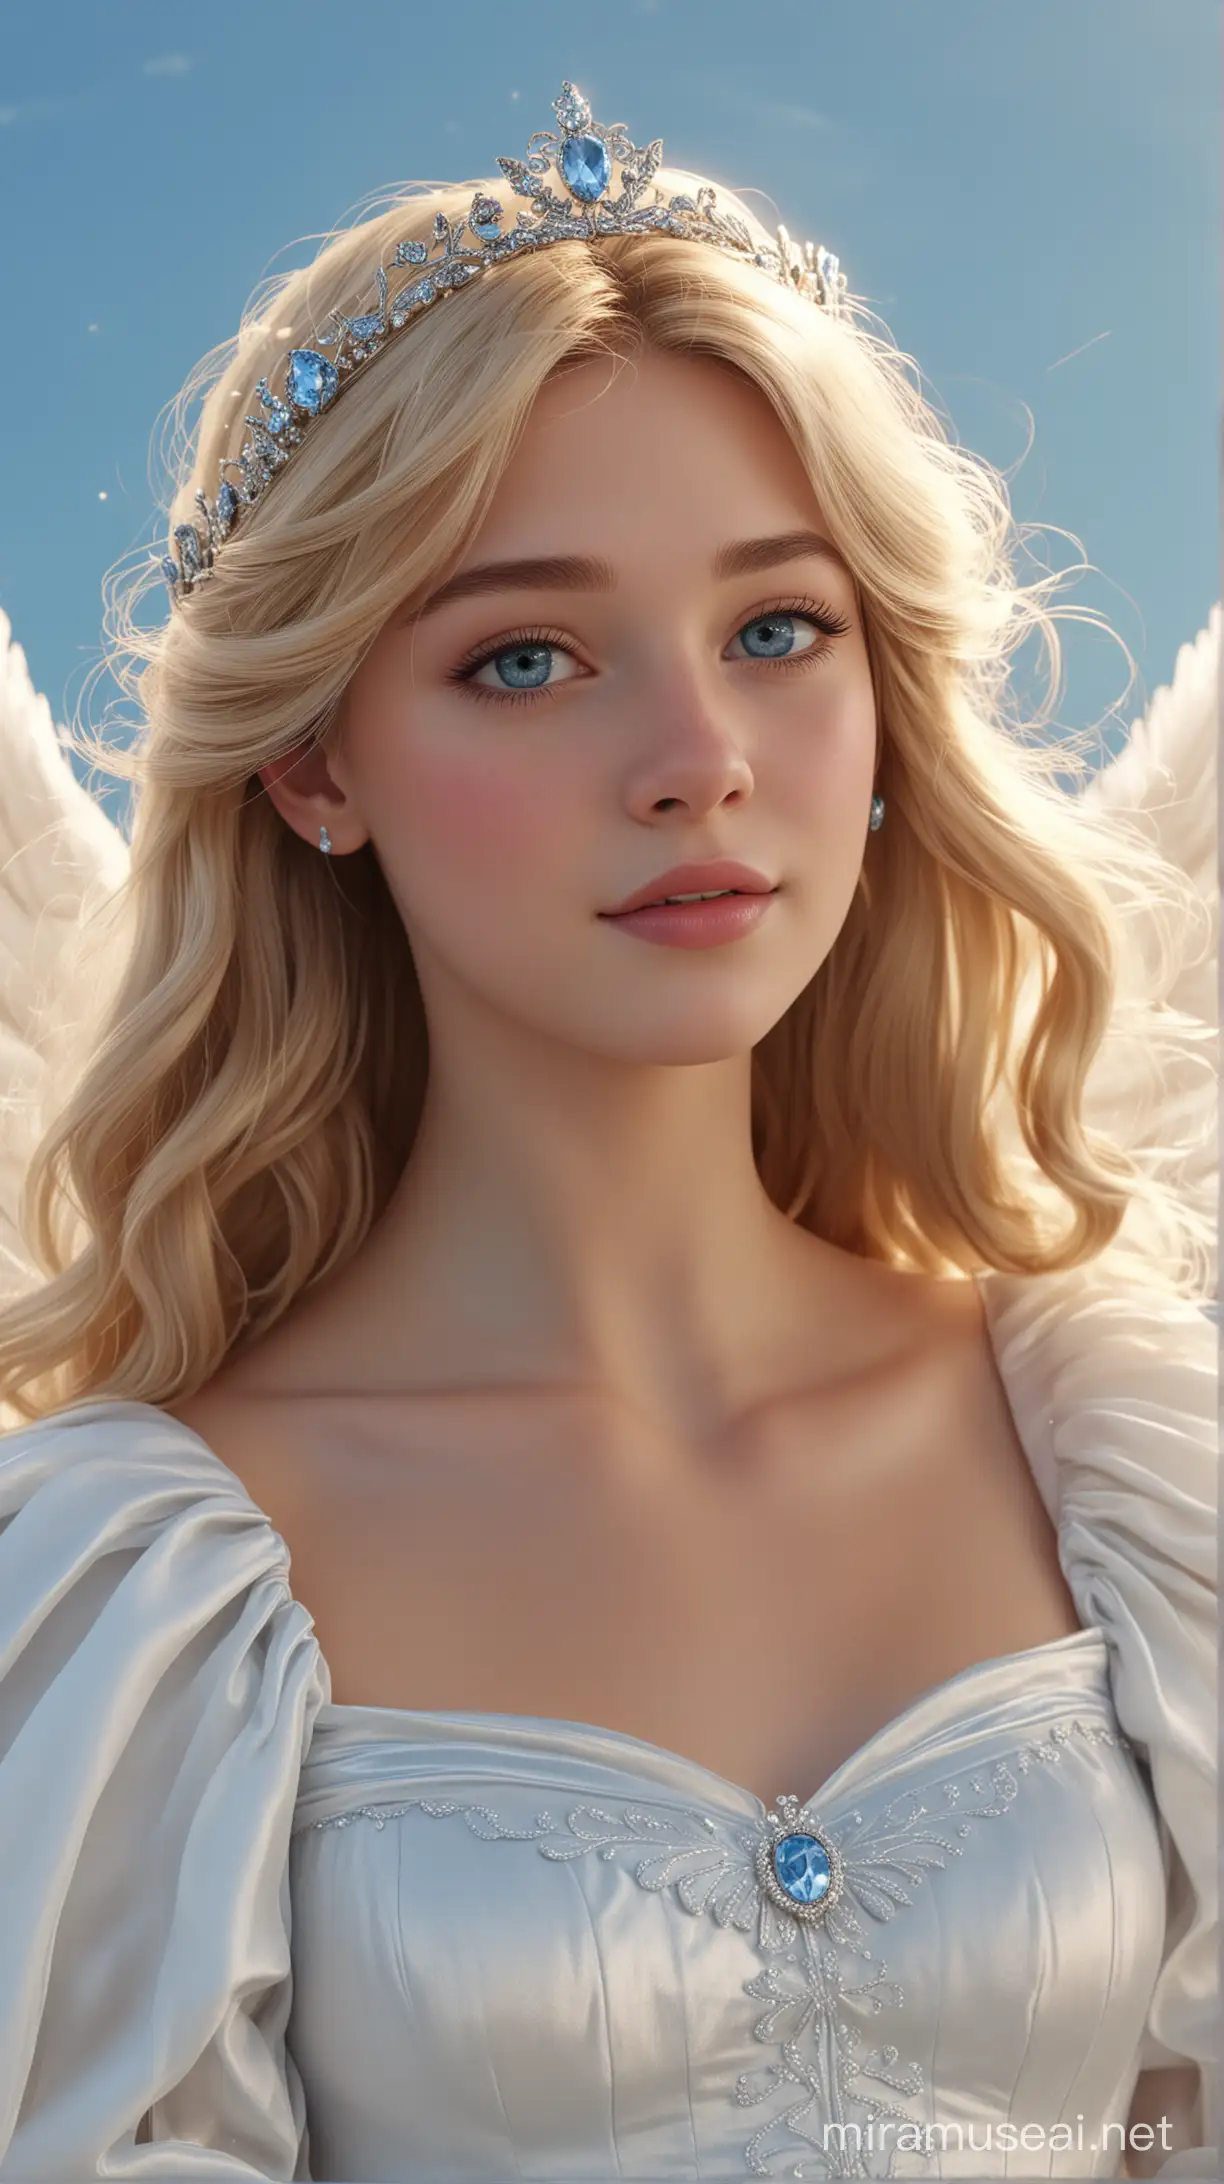 Celestial Disney Princess Cinderella Flying in Sky with Angelic Wings